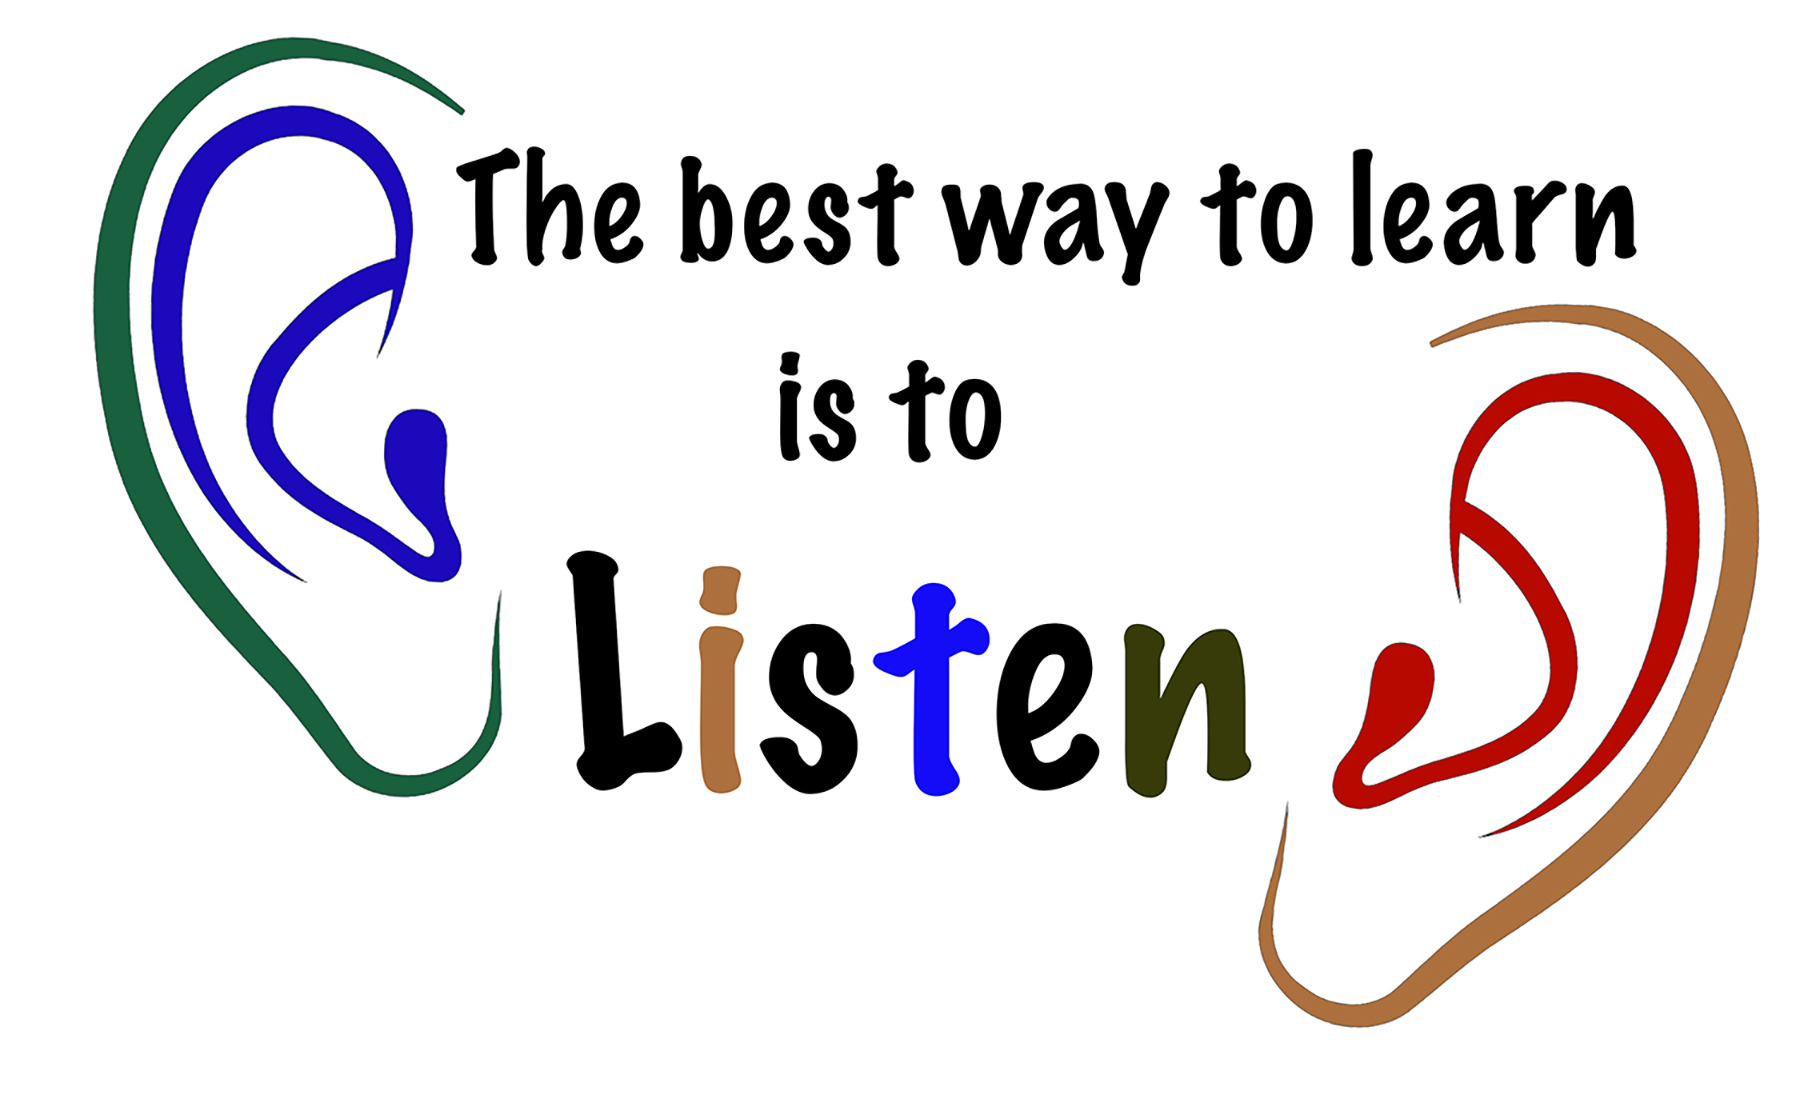 The best way to learn is to Listen